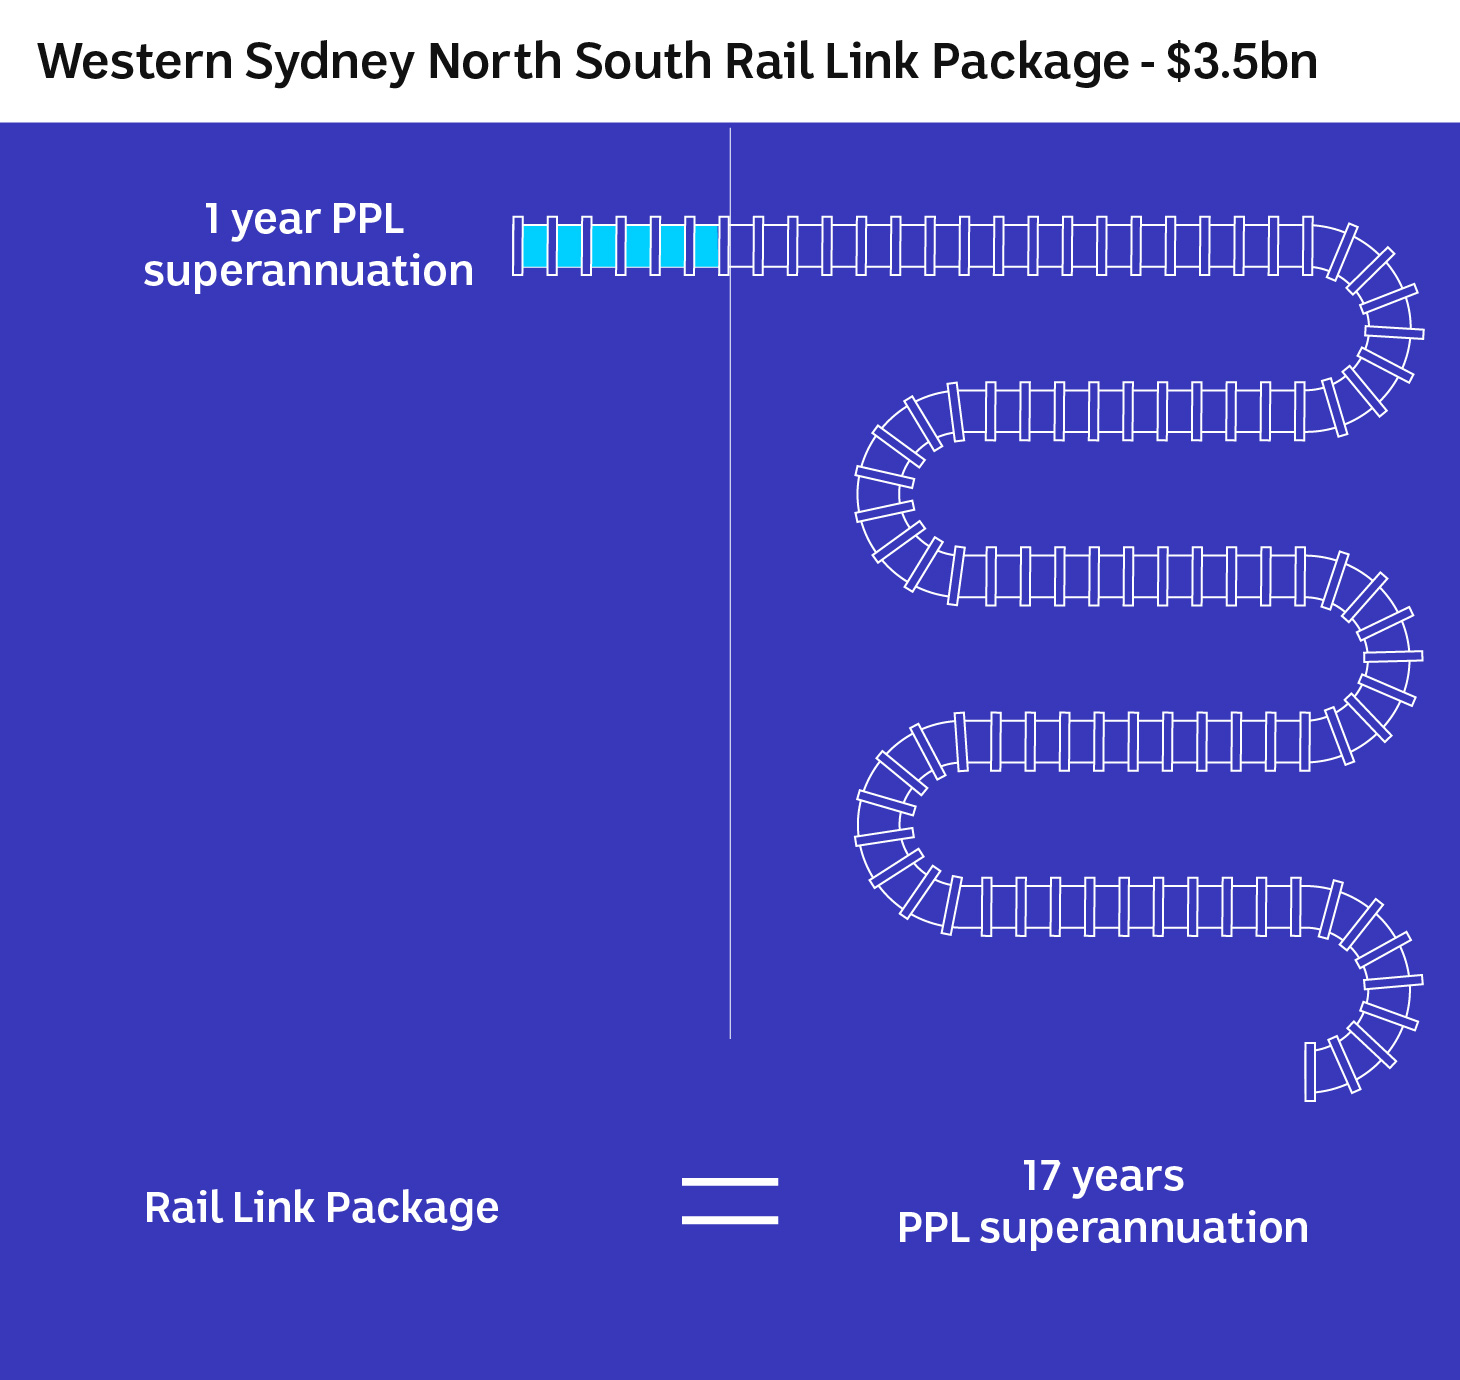 Illustration of a piece of rail representing one year of superannuation payments next to a full track equal to 17 years' worth.